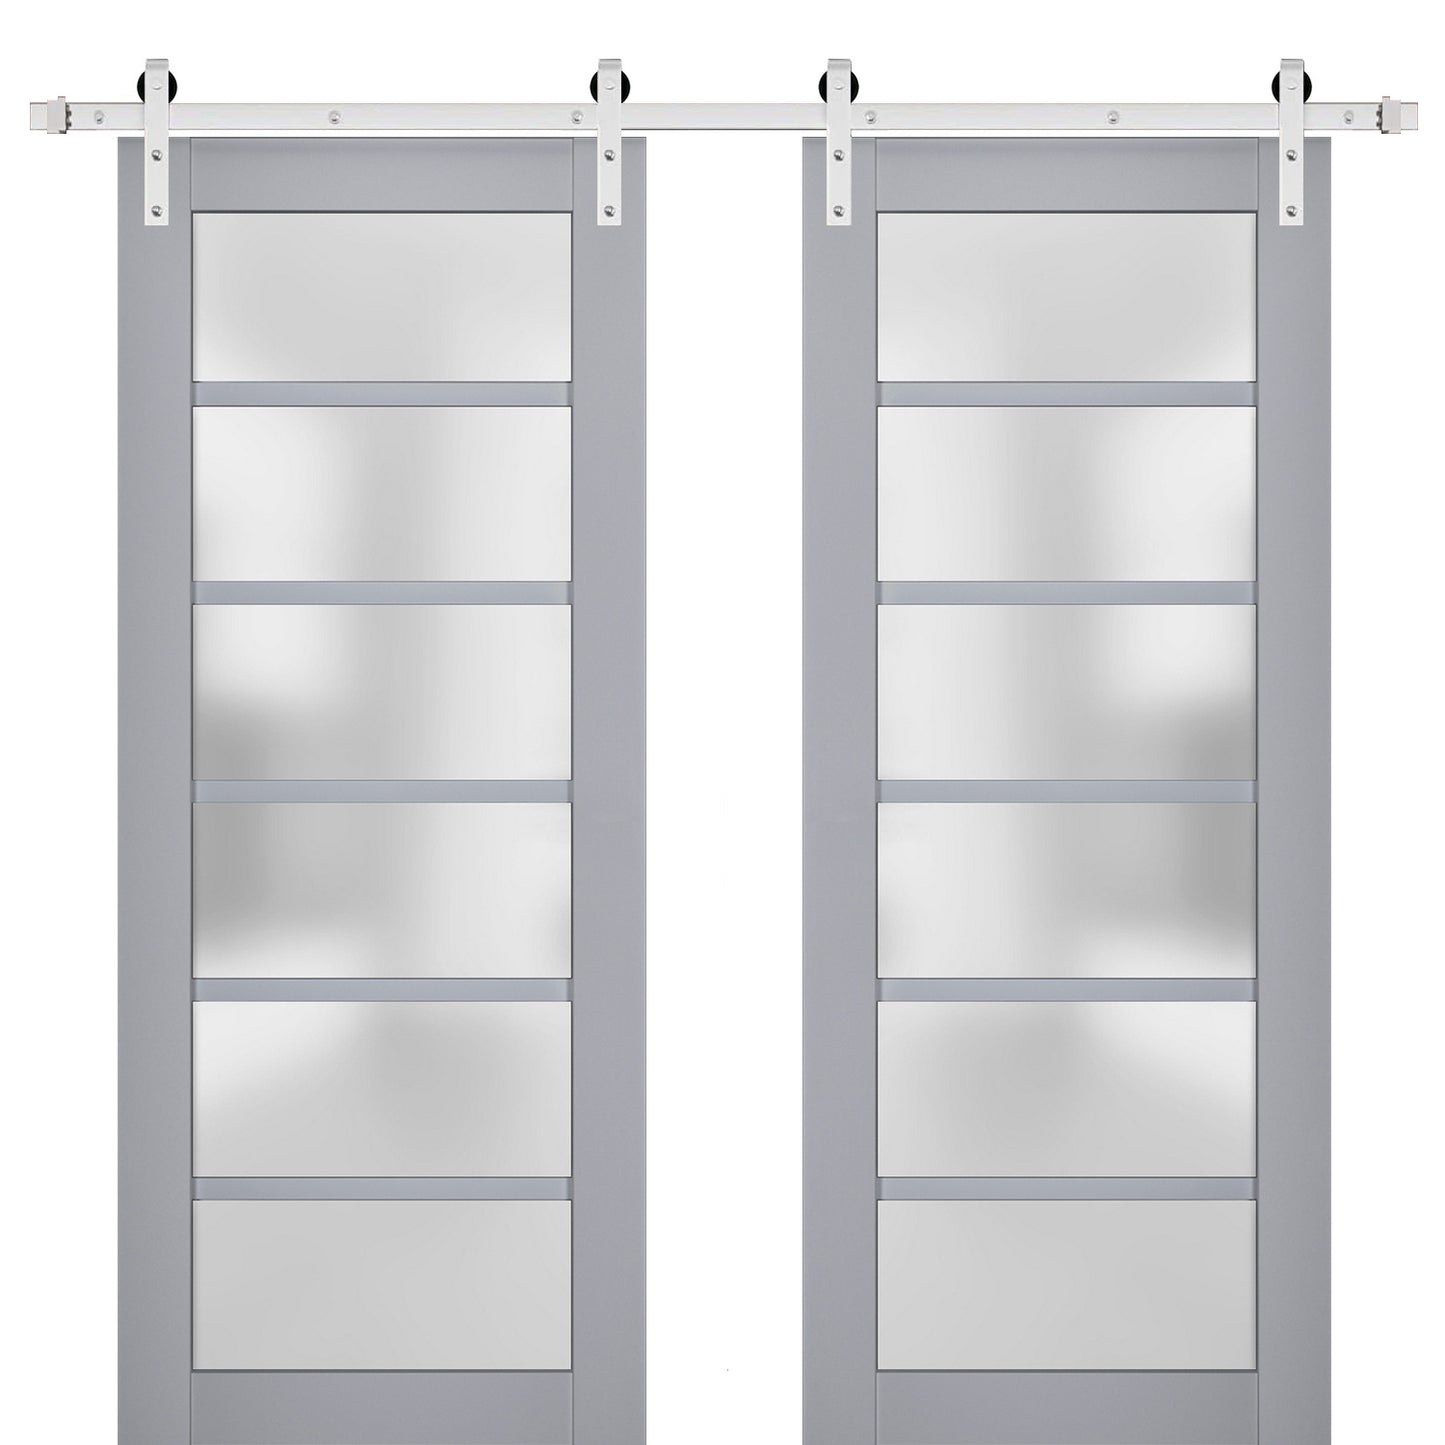 Veregio 7602 Matte Grey Double Barn Door with Frosted Glass and Silver Finish Rail